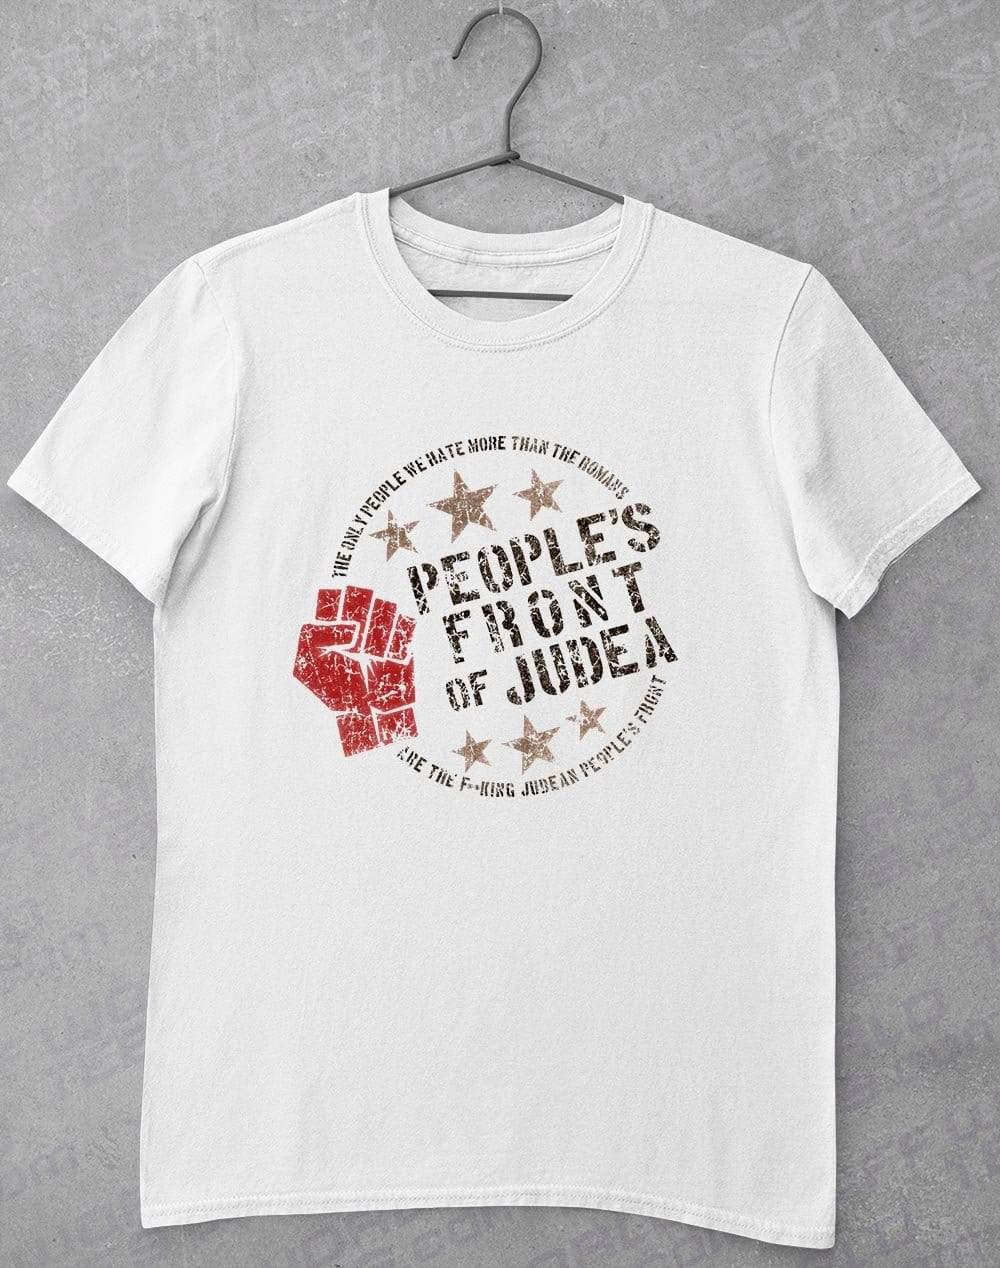 People's Front of Judea T-Shirt S / White  - Off World Tees